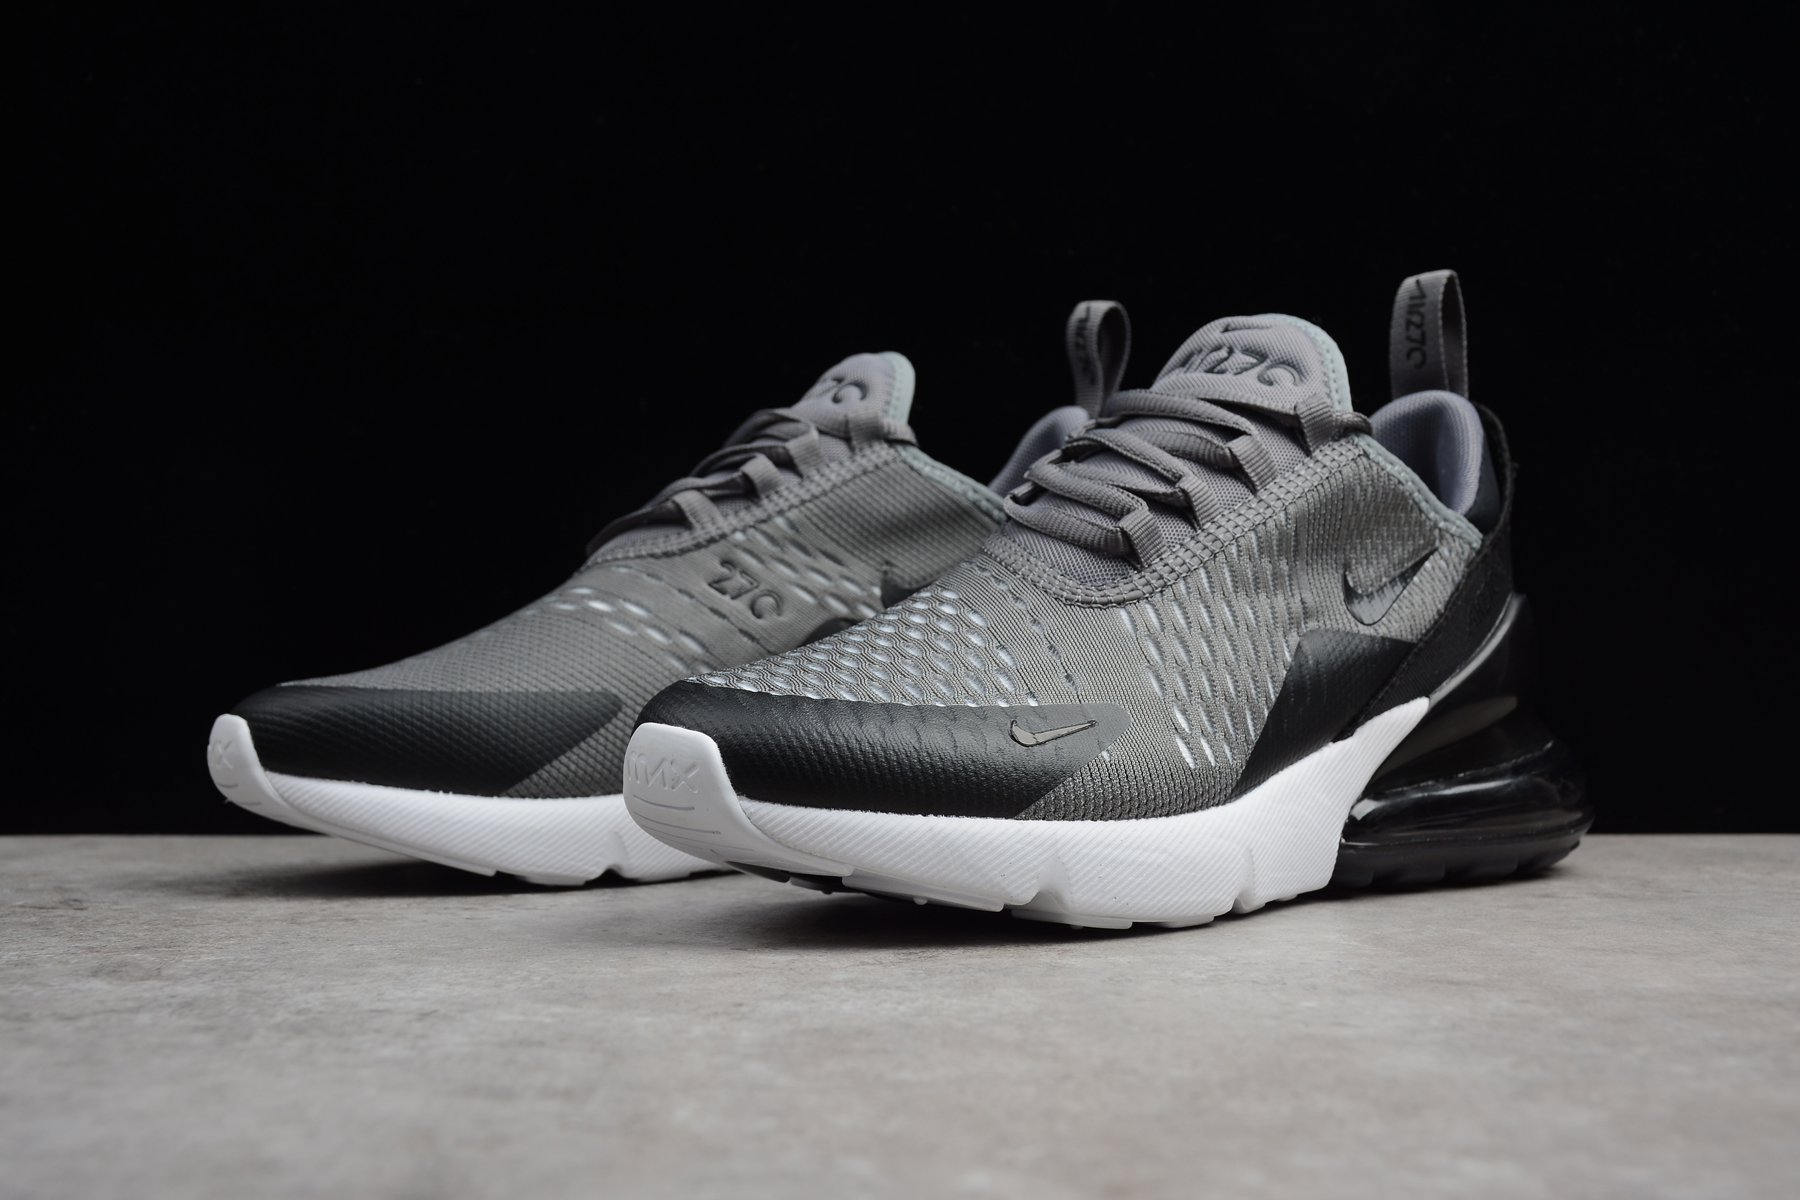 Nike Air Max 270 Grey Black White Men's Size For Sale